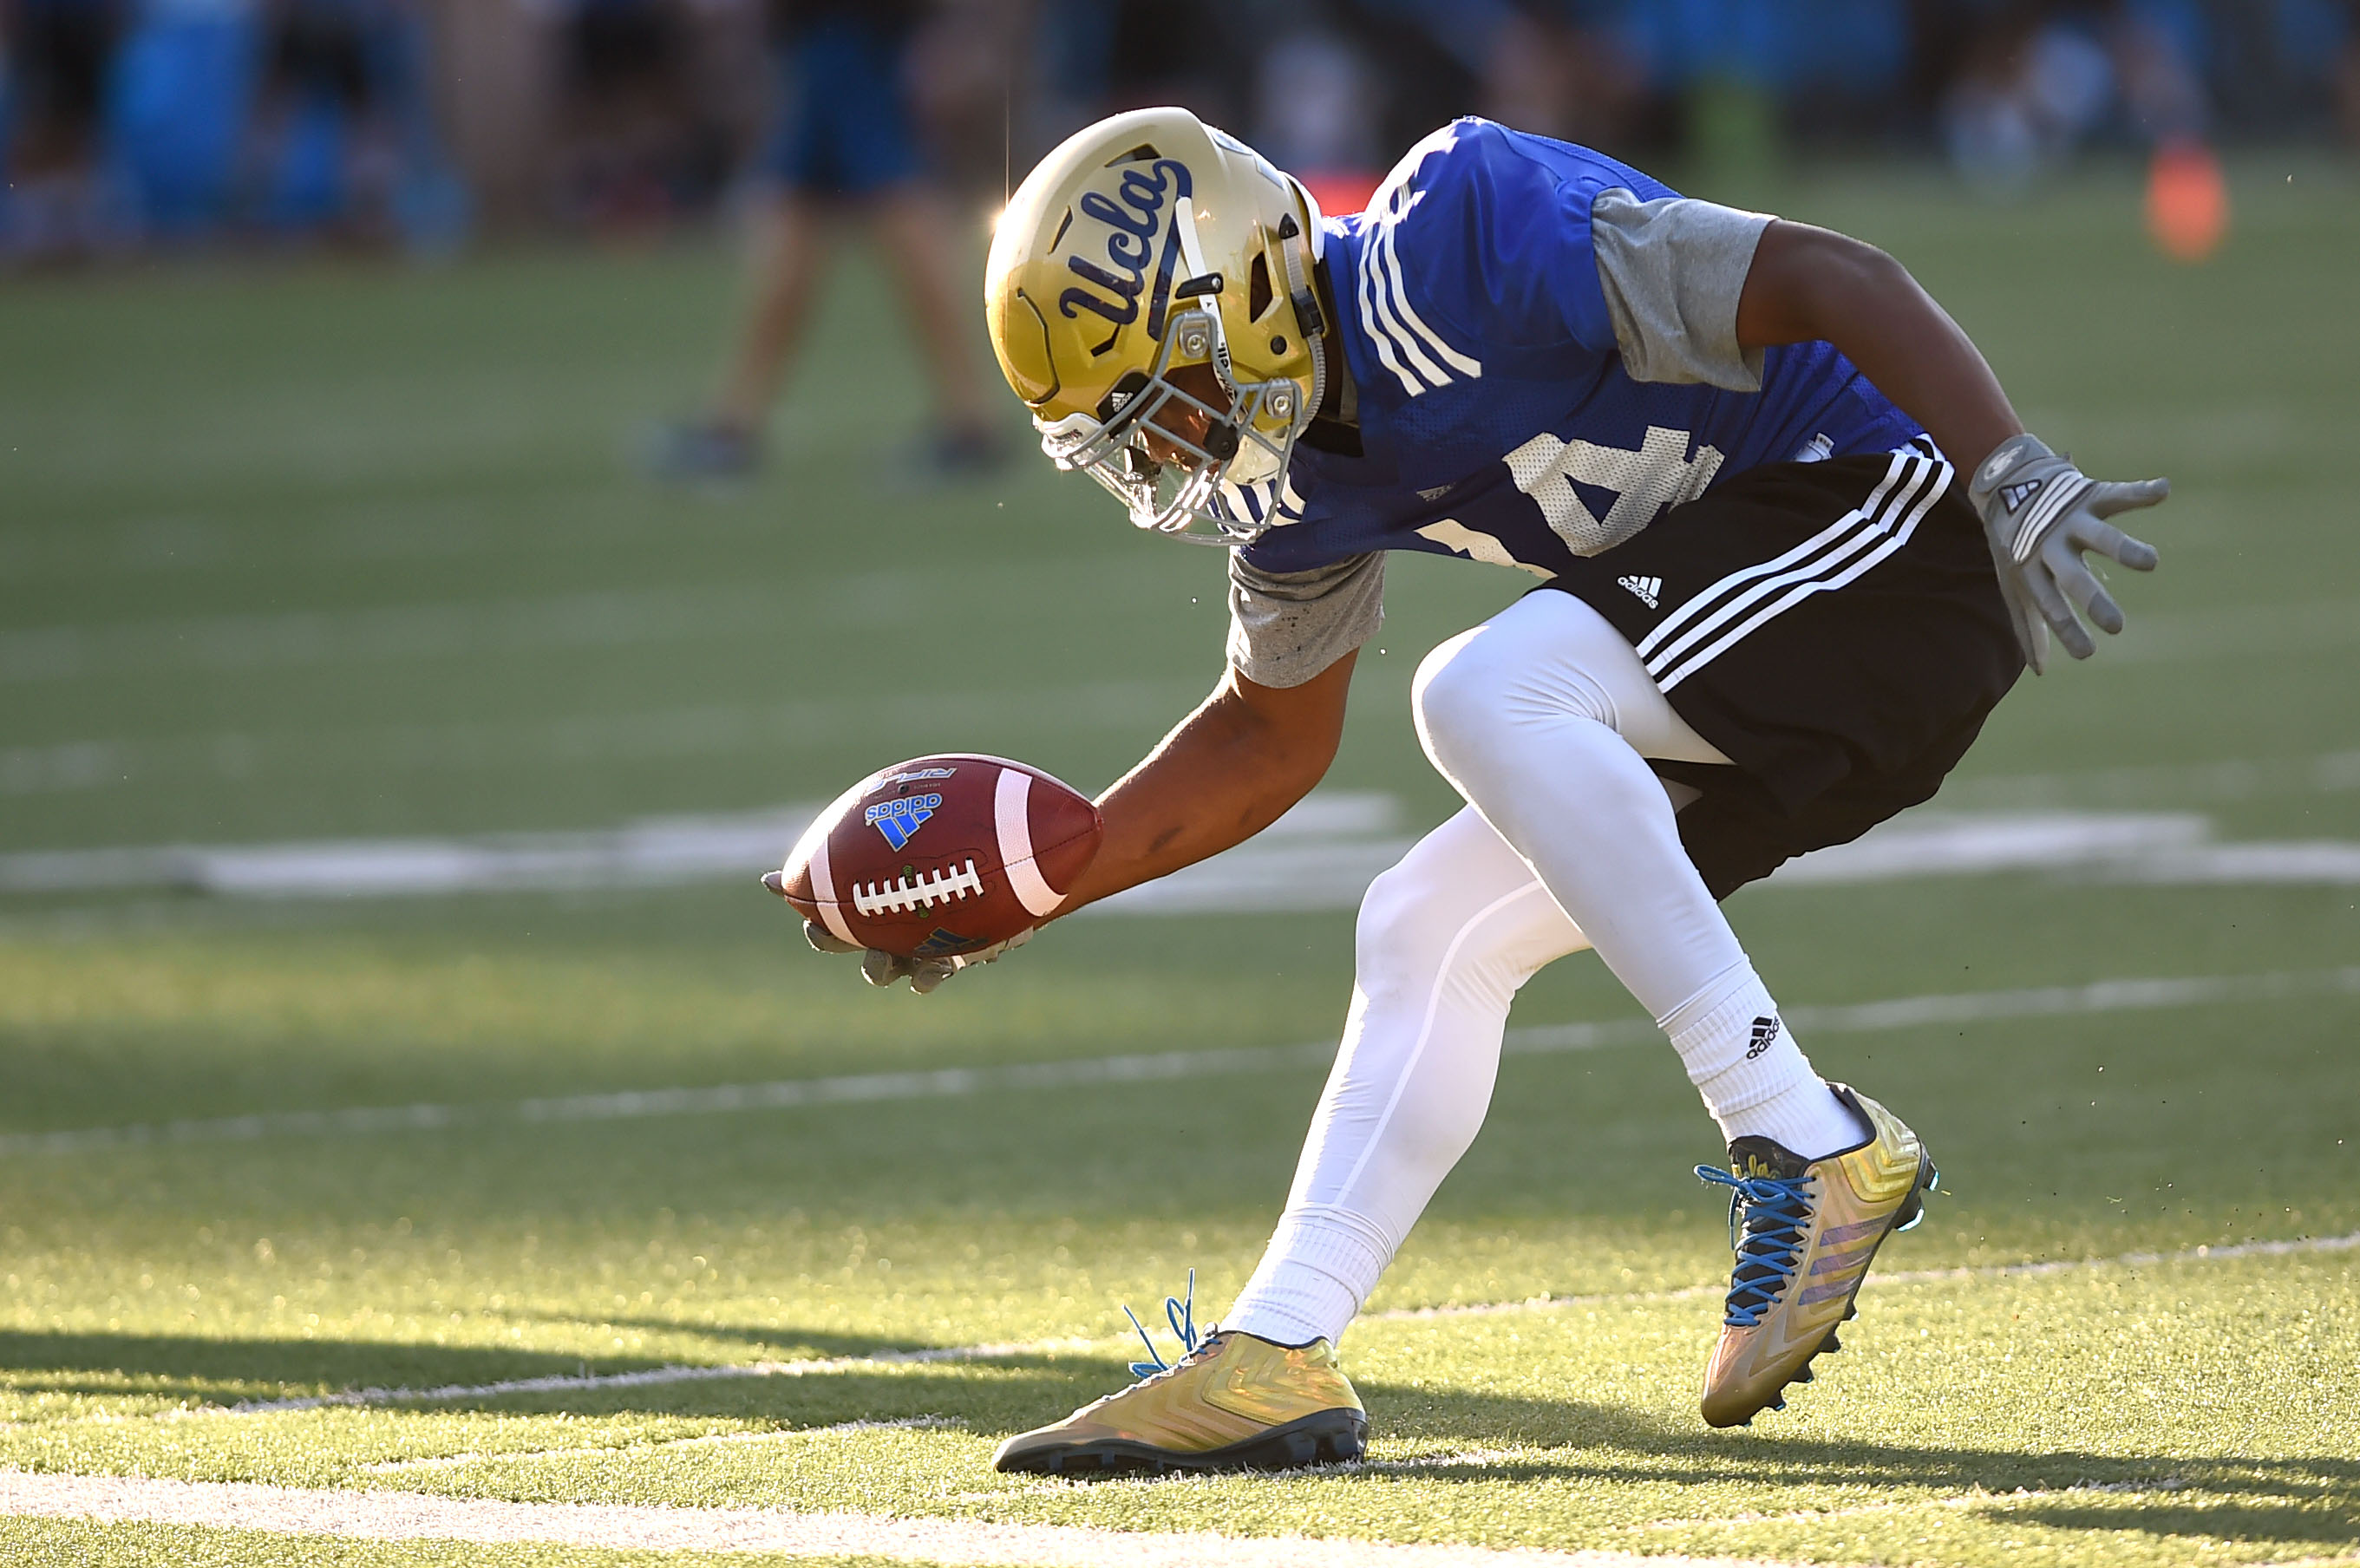 UCLA receiver Mossi Johnson is out for the season after suffering his second major knee injury in less than three years. (Andy Holzman/Staff)